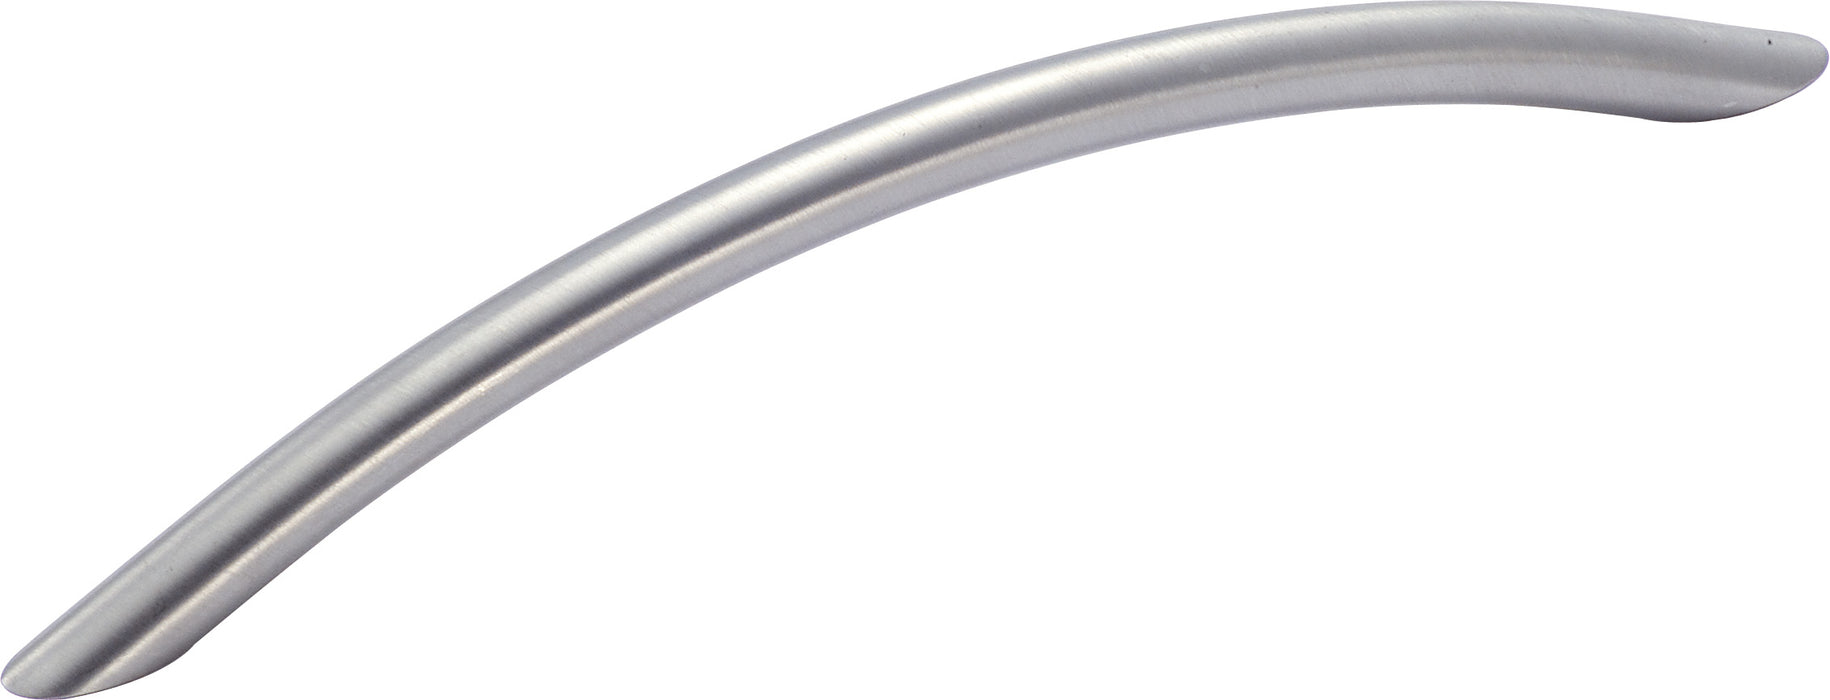 6-5/16" Bow Pull Stainless Steel - Essential'Z Stainless Steel Collection